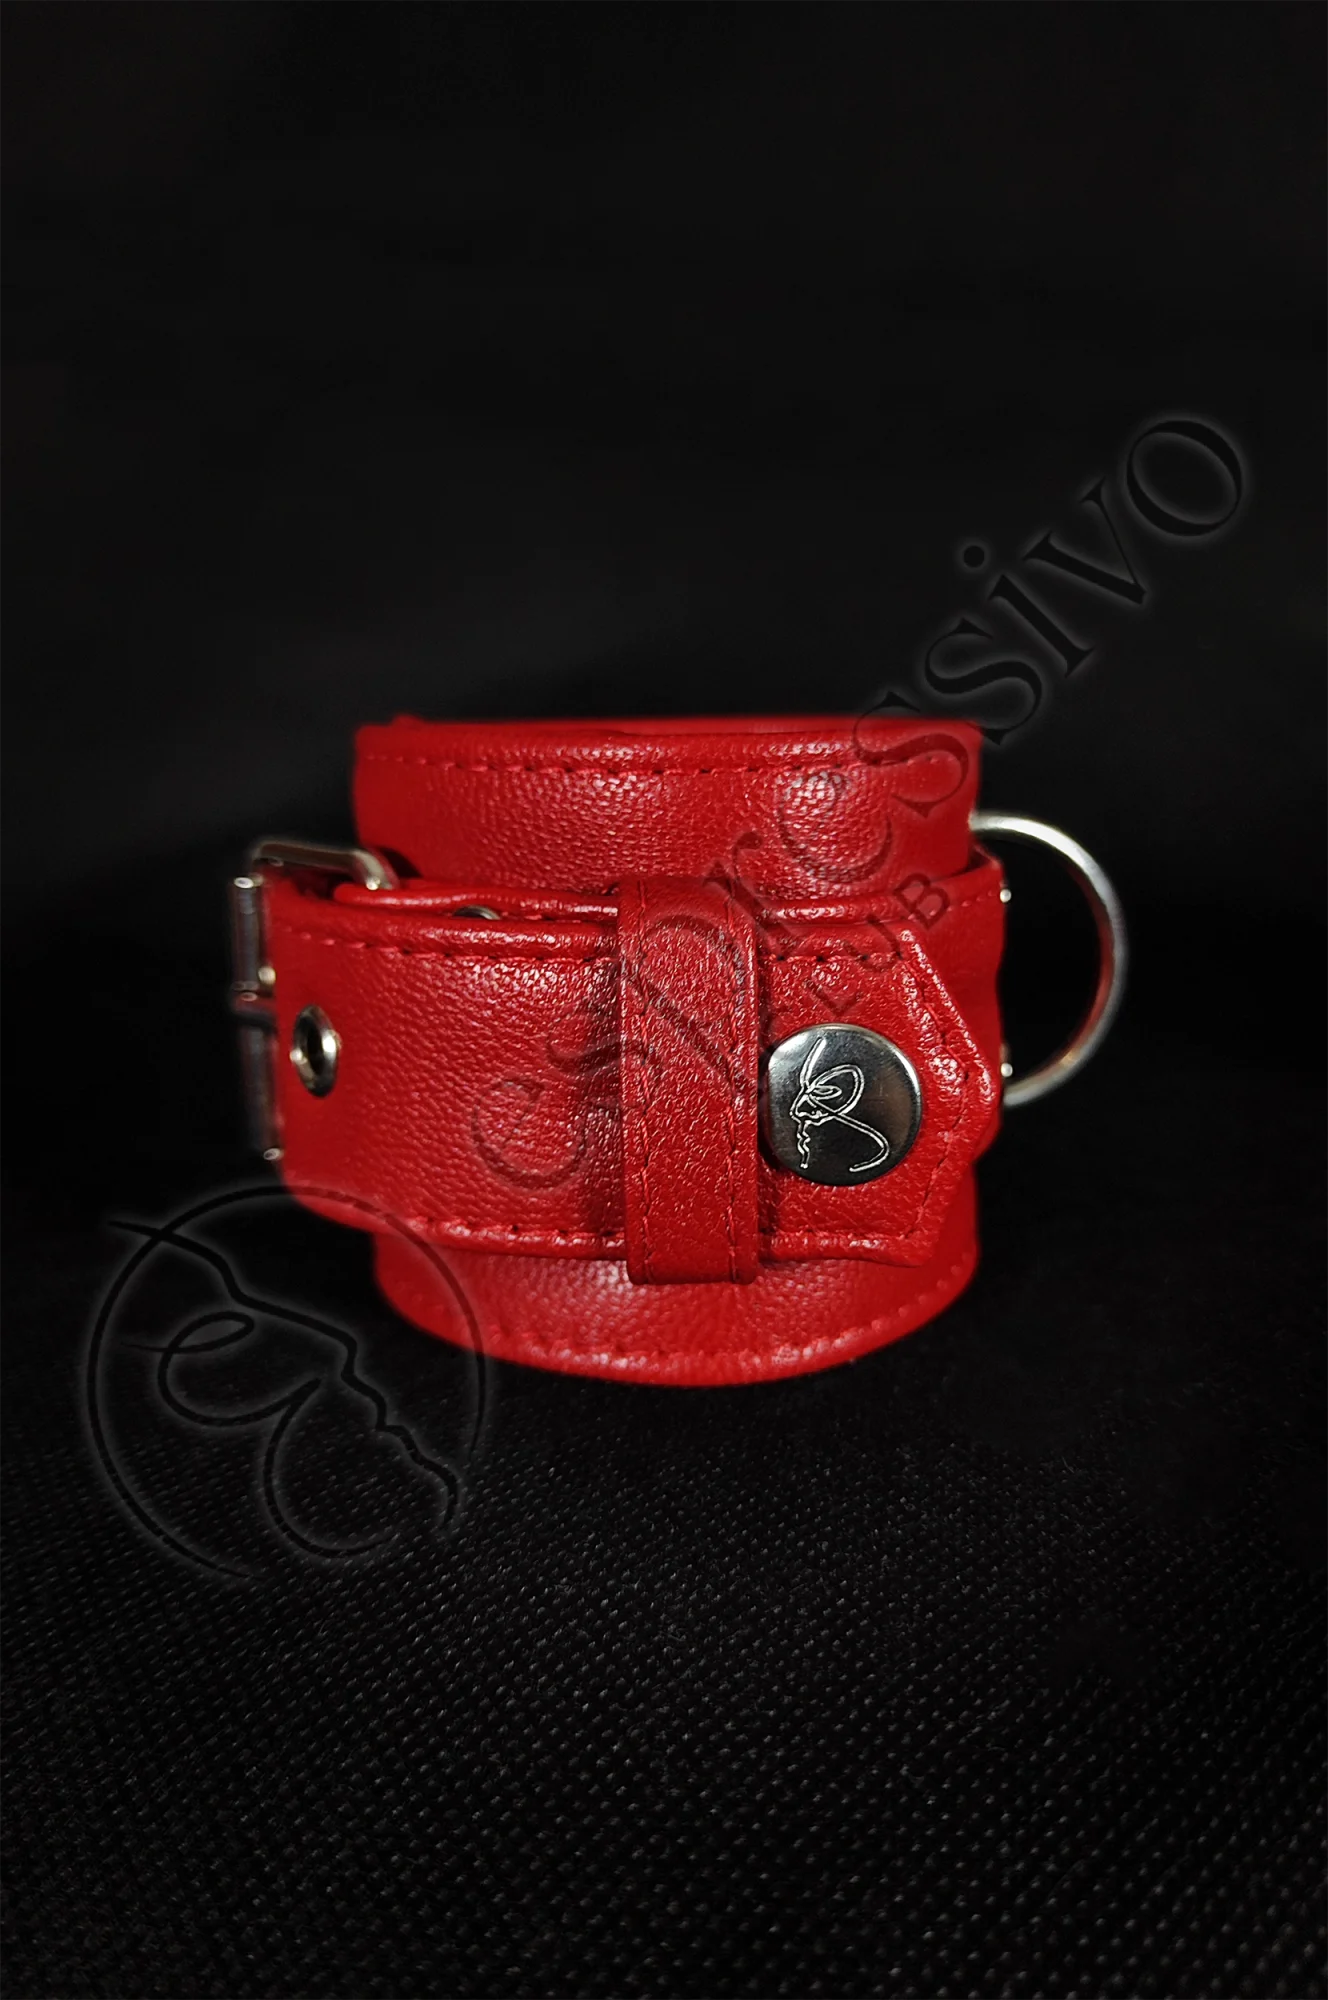 Red Leather Bondage Cuffs - Wrist & Ankle Restraints Limited Edition Cuffs